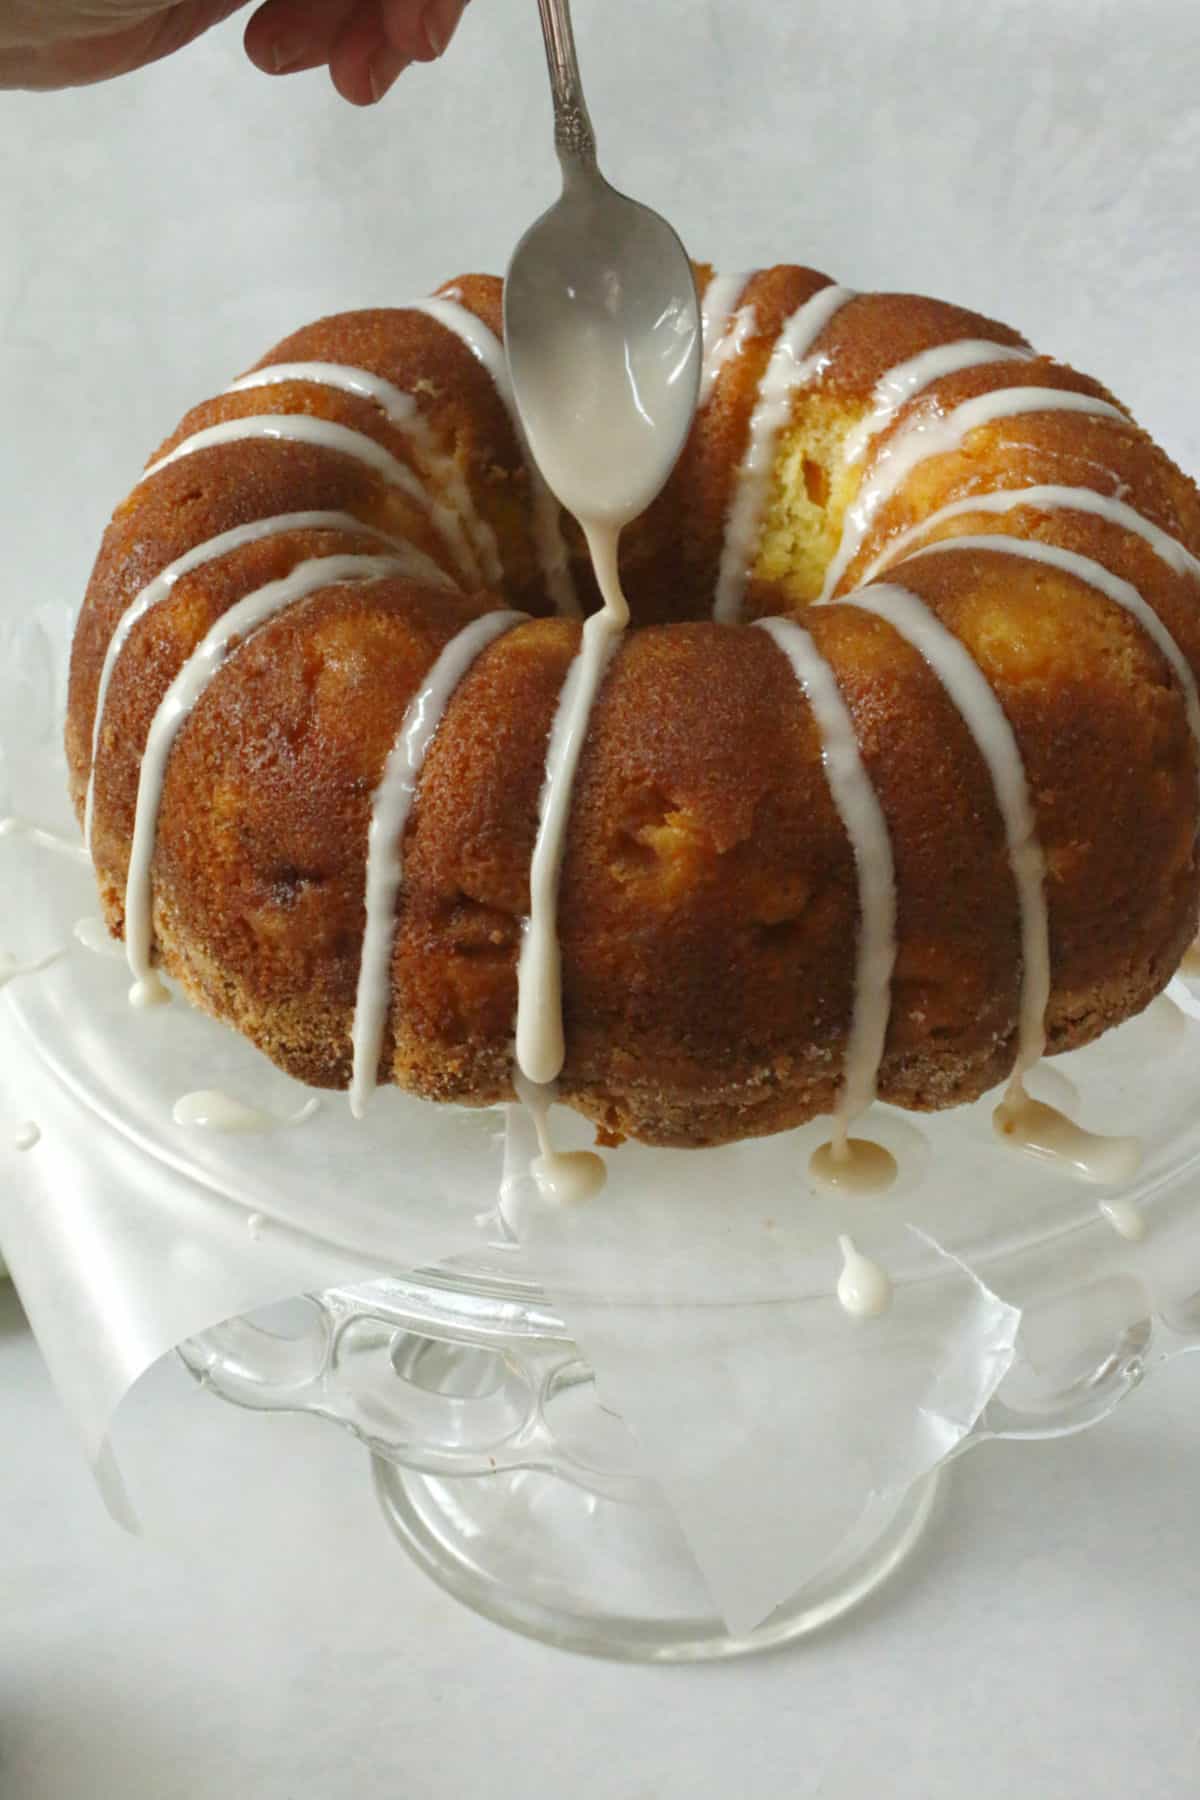 Drizzling icing on a bundt cake.